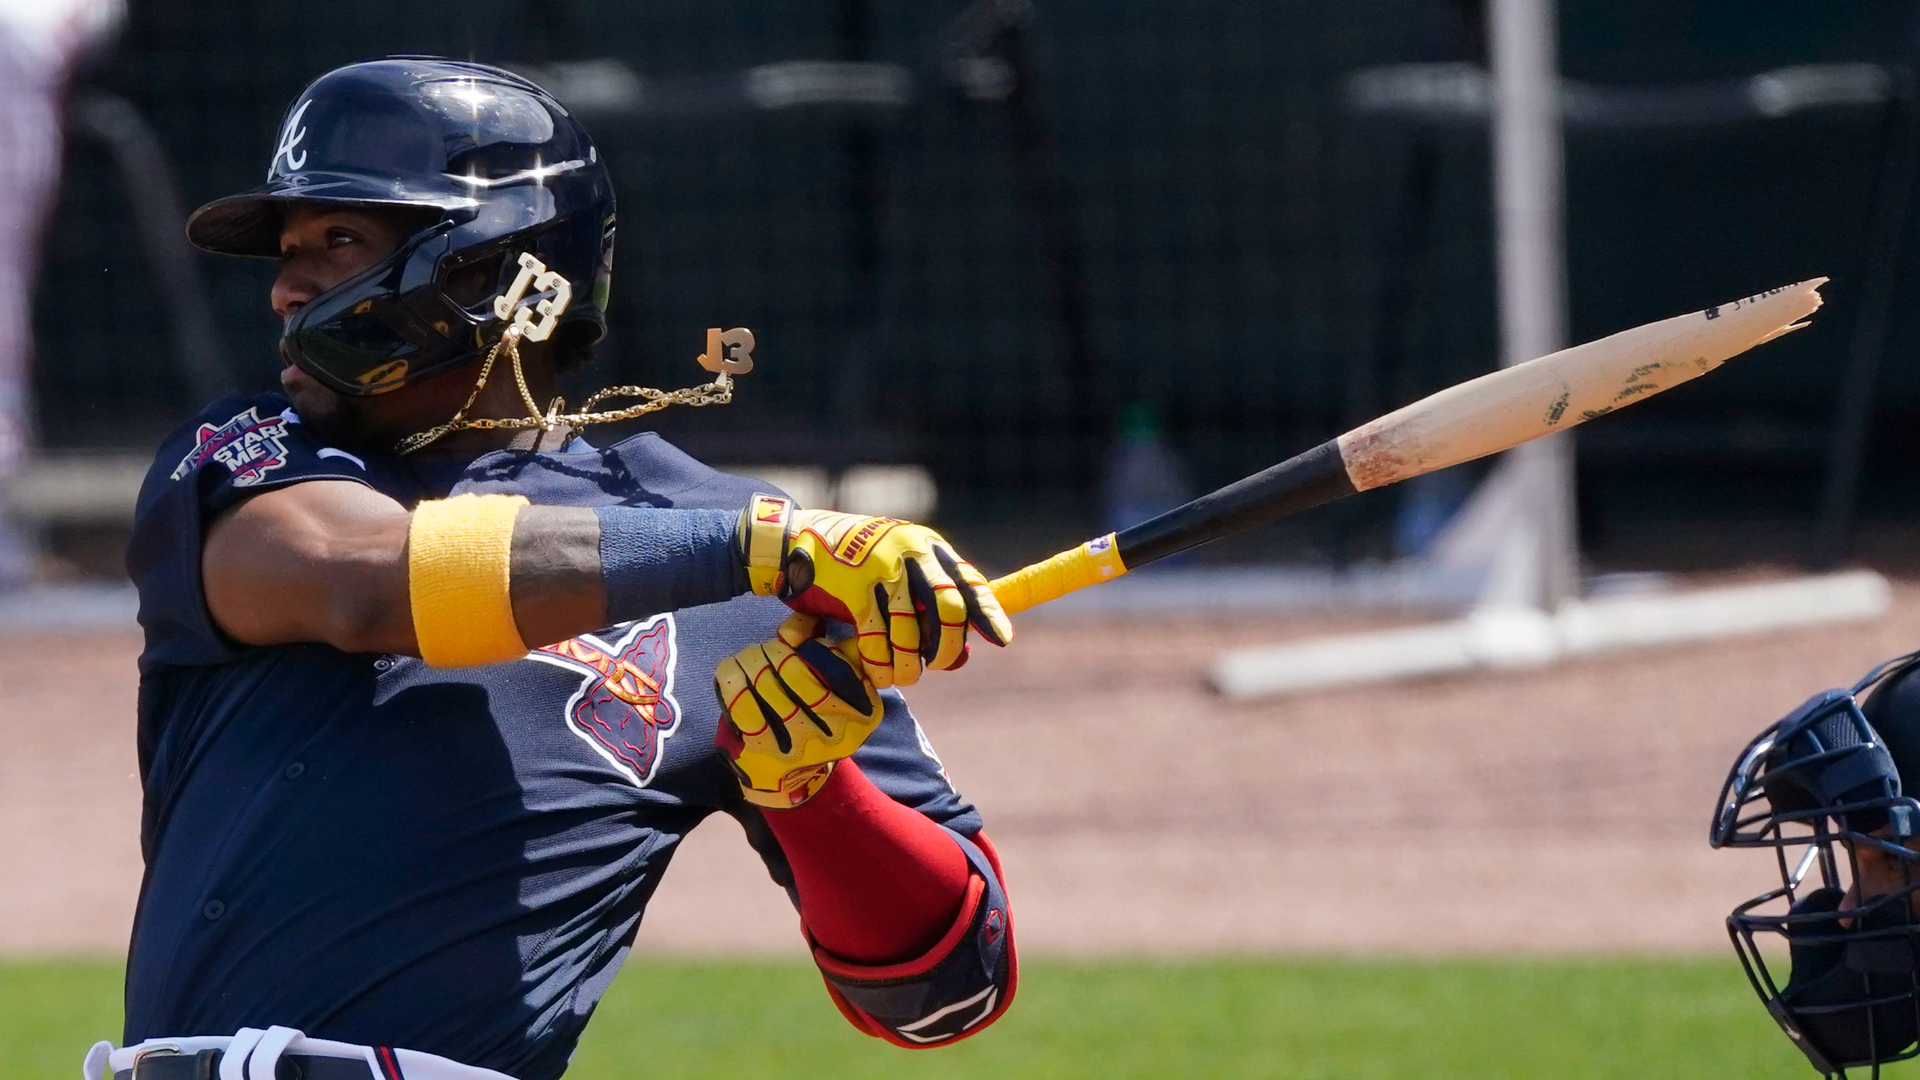 Braves Spring Training 2020: Ronald Acuña Jr. at batting practice